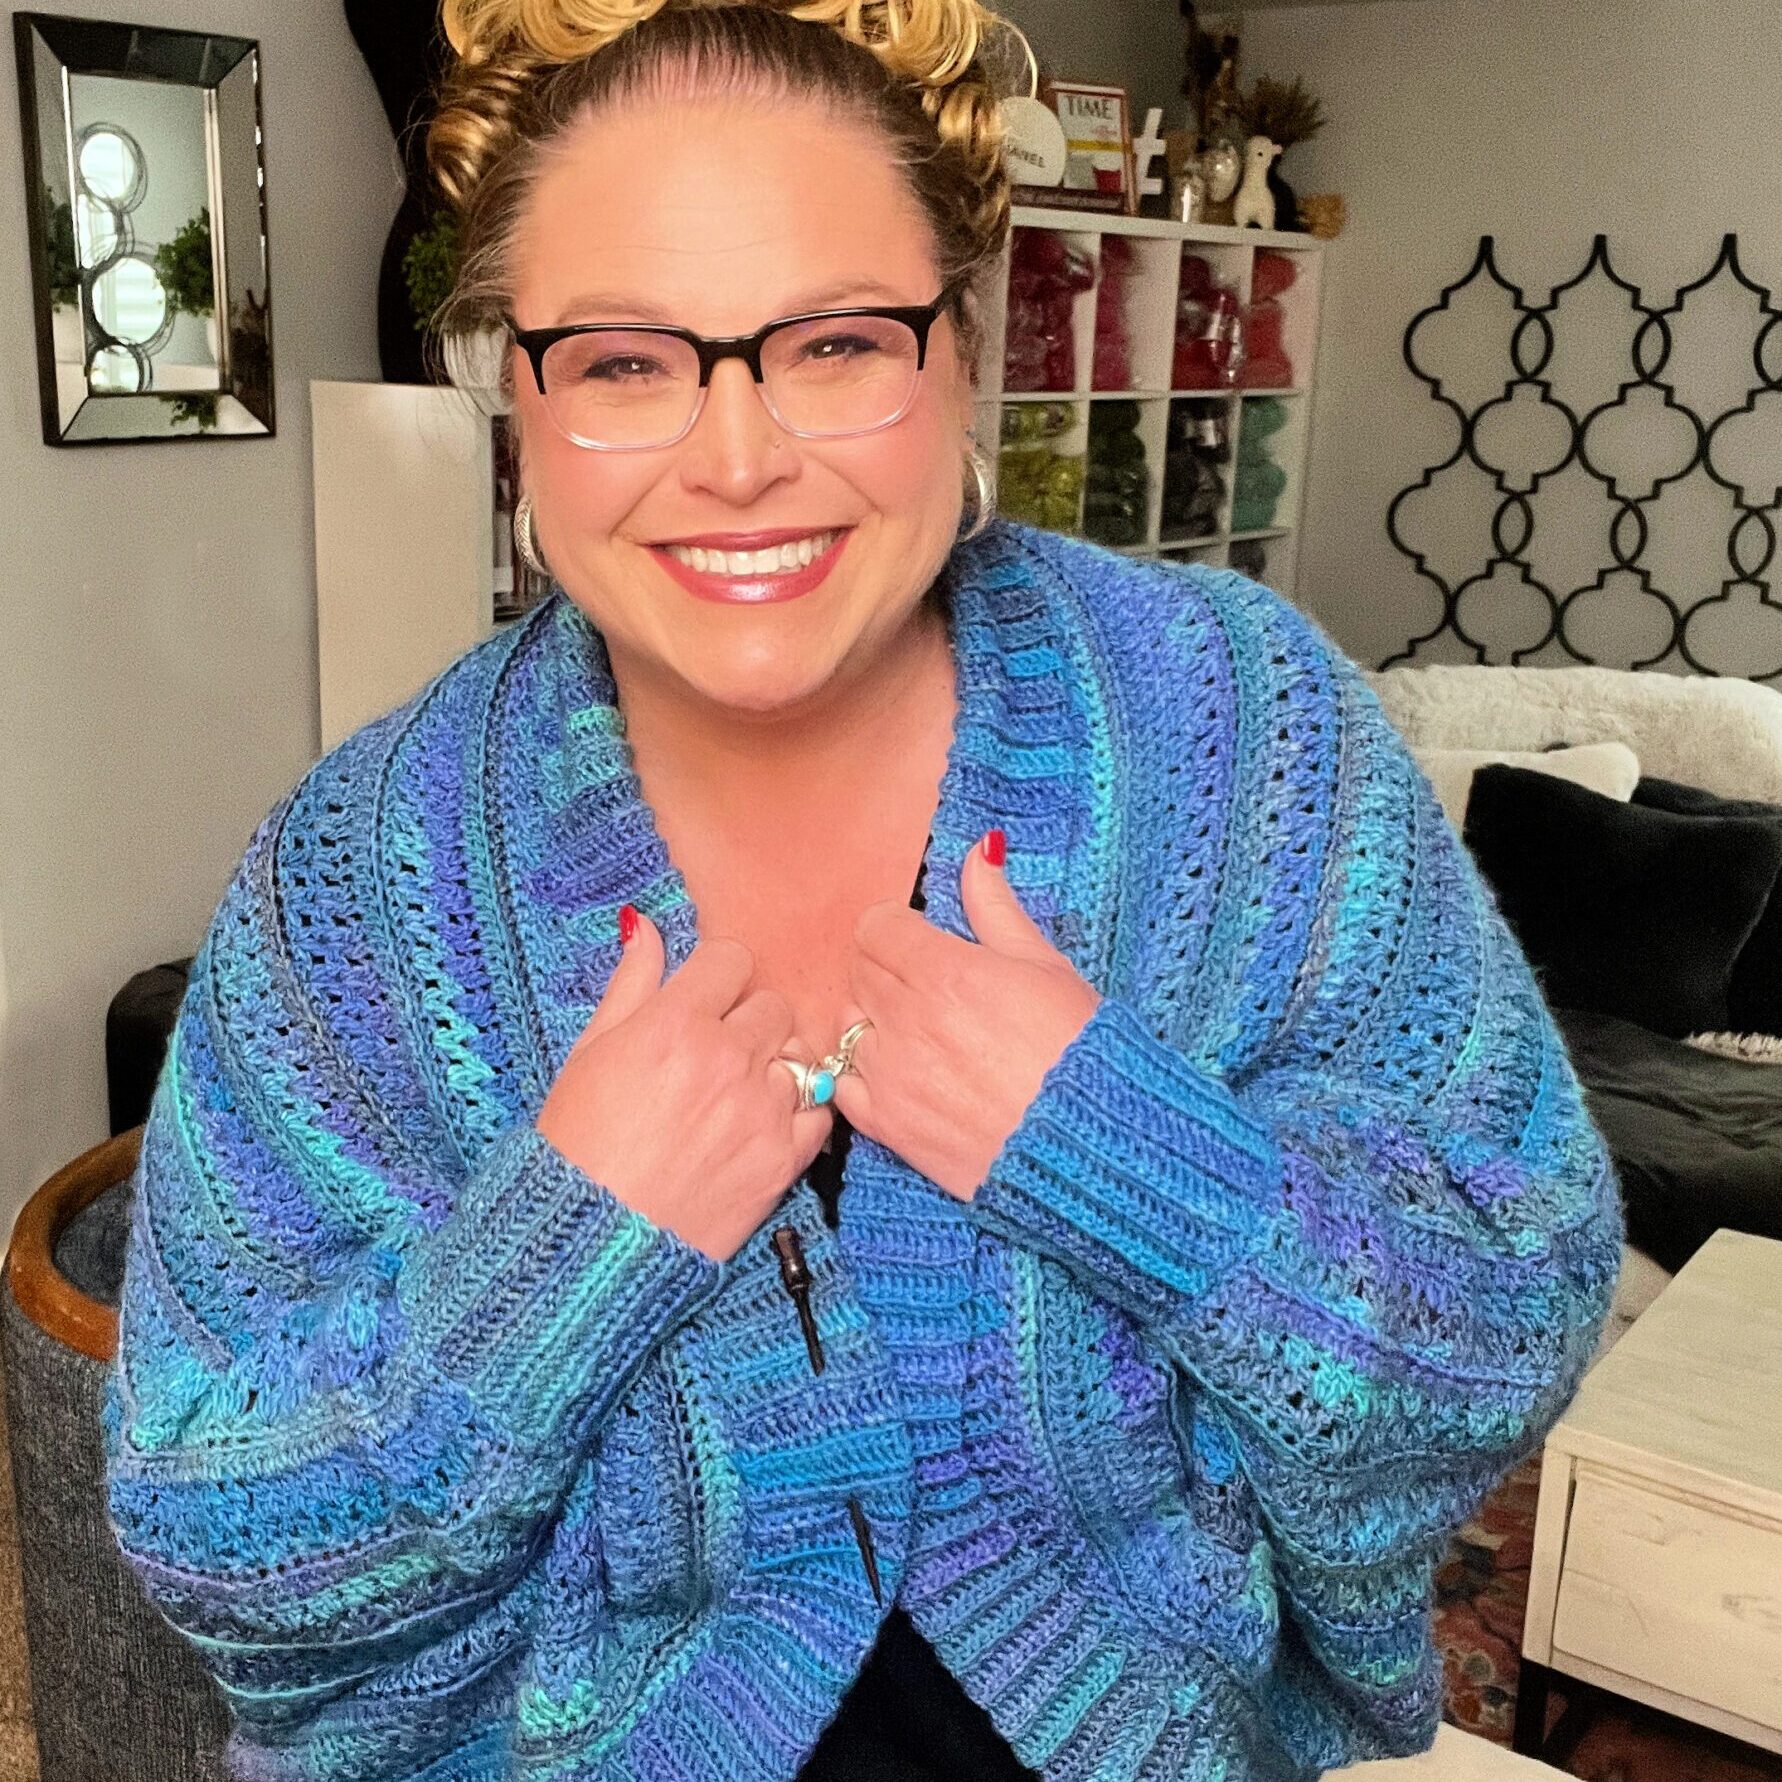 A smiling woman with curly updo hair, wearing glasses, beams as she models the You Are Valued Crochet Cardigan in a vivid blue, showcasing the crochet texture against a cozy home backdrop - You Are Valued Crochet Cocoon Cardigan Marly Bird.